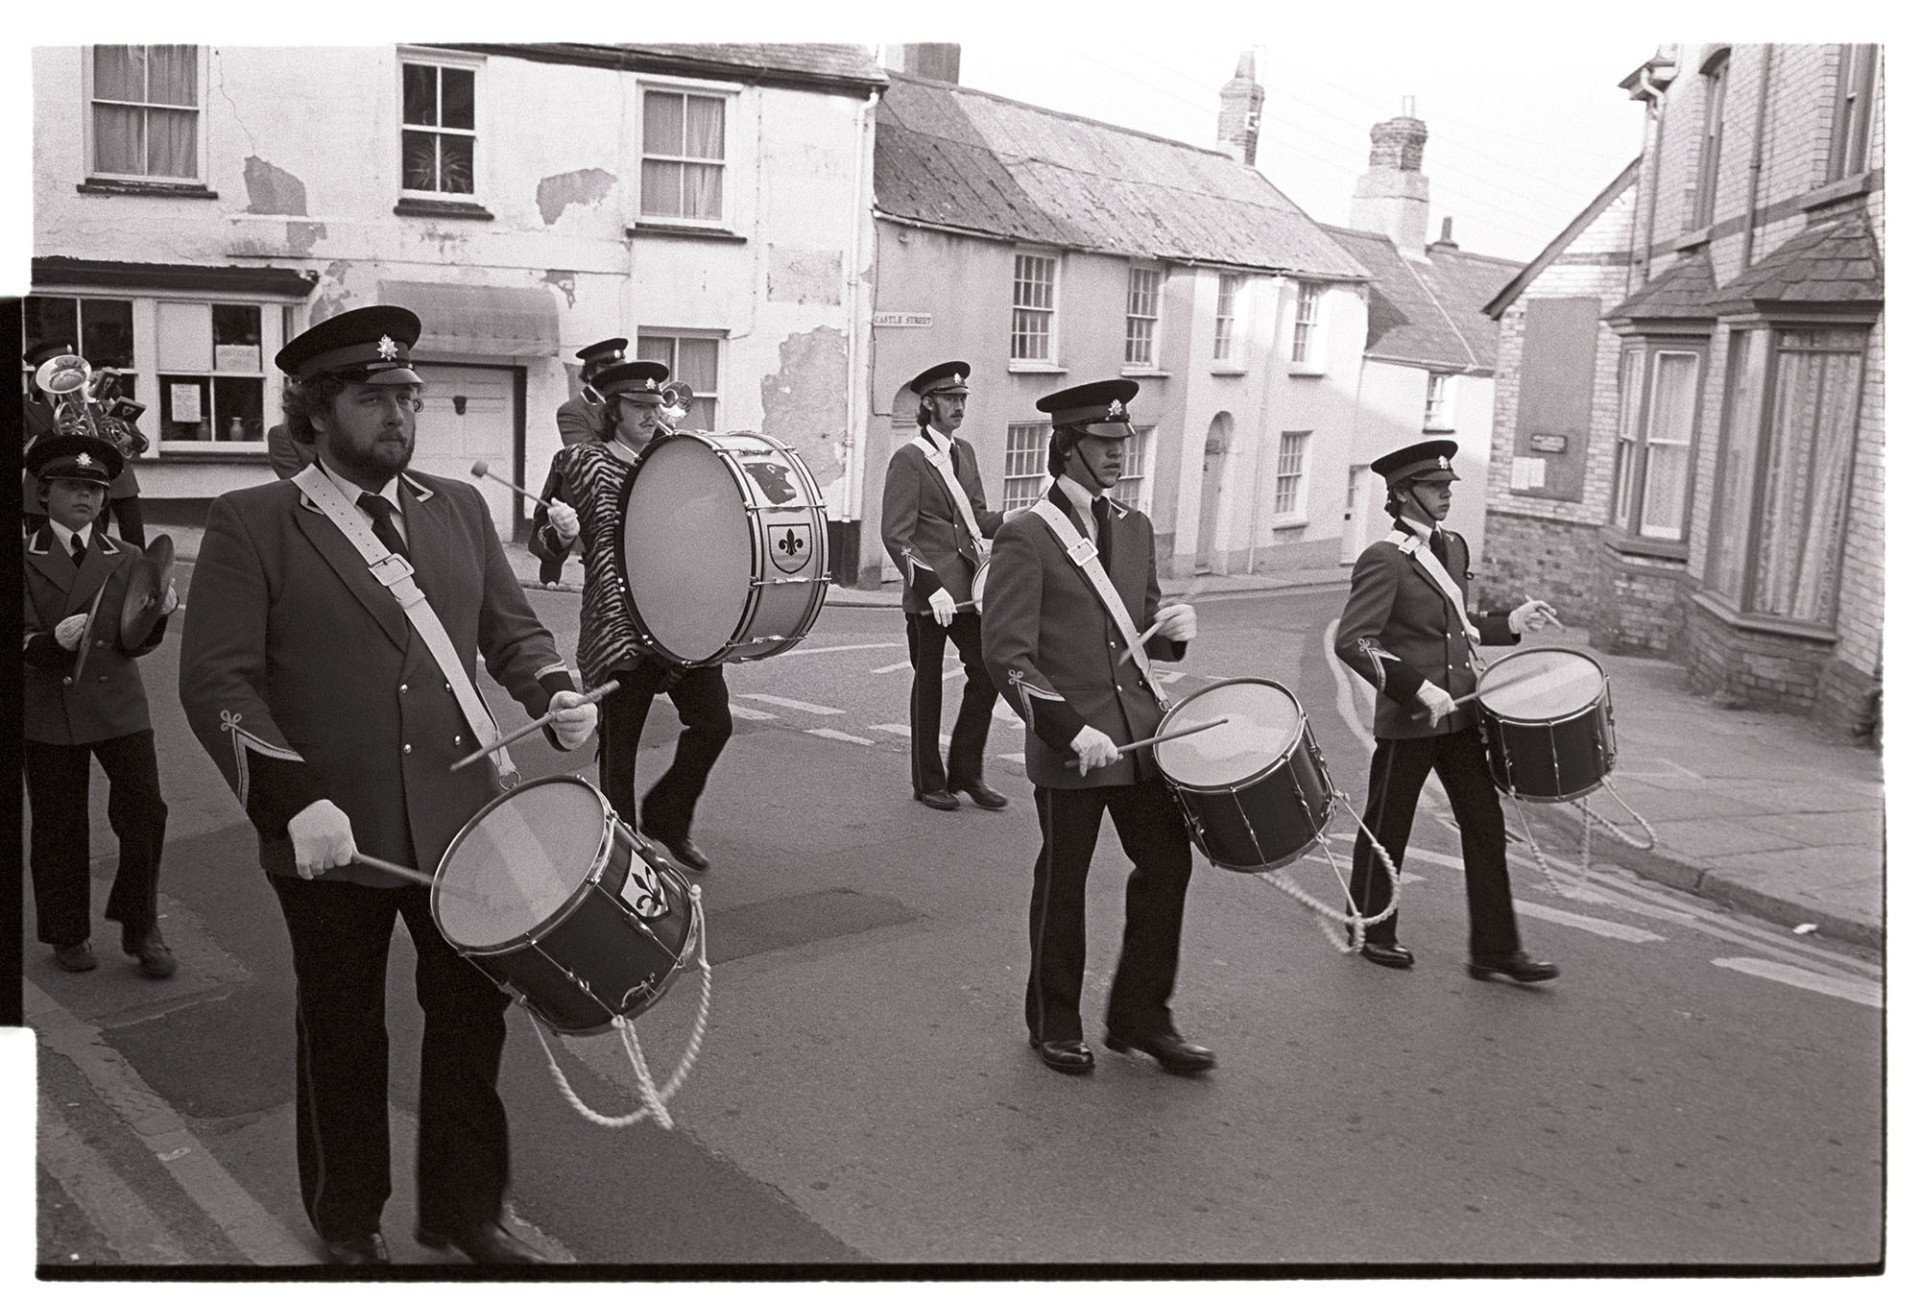 Military parade round town, the Brass Band corps of drums.
[Members of a  Corps of Drums playing and marching in a street in Torrington at a military parade.]